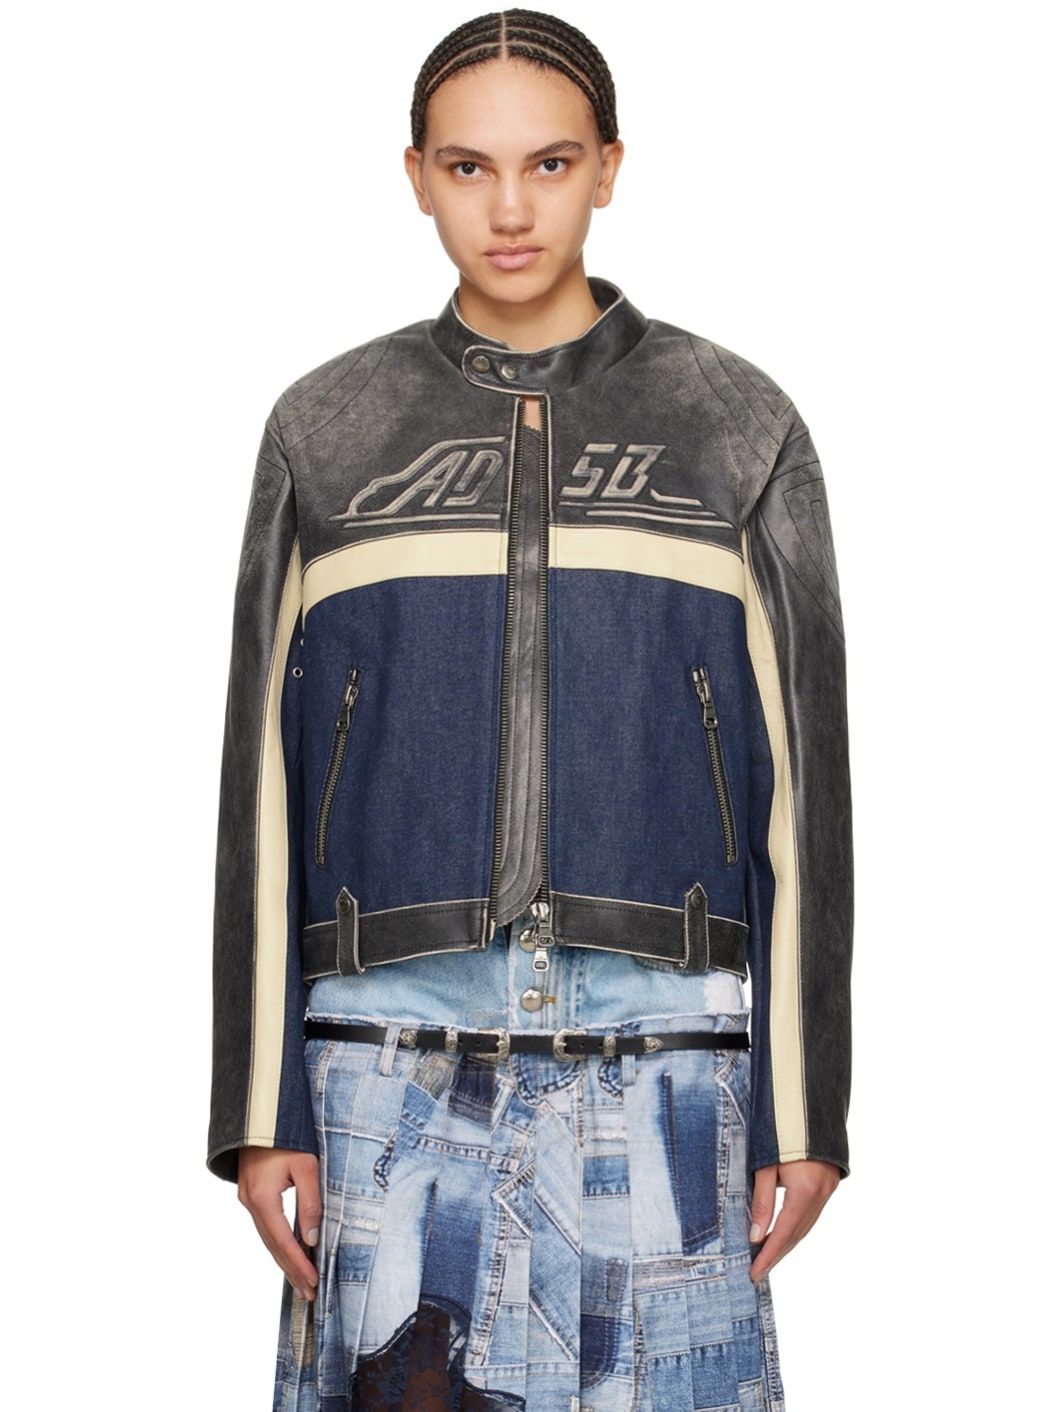 Gray & Blue Racing Leather Jacket - 1